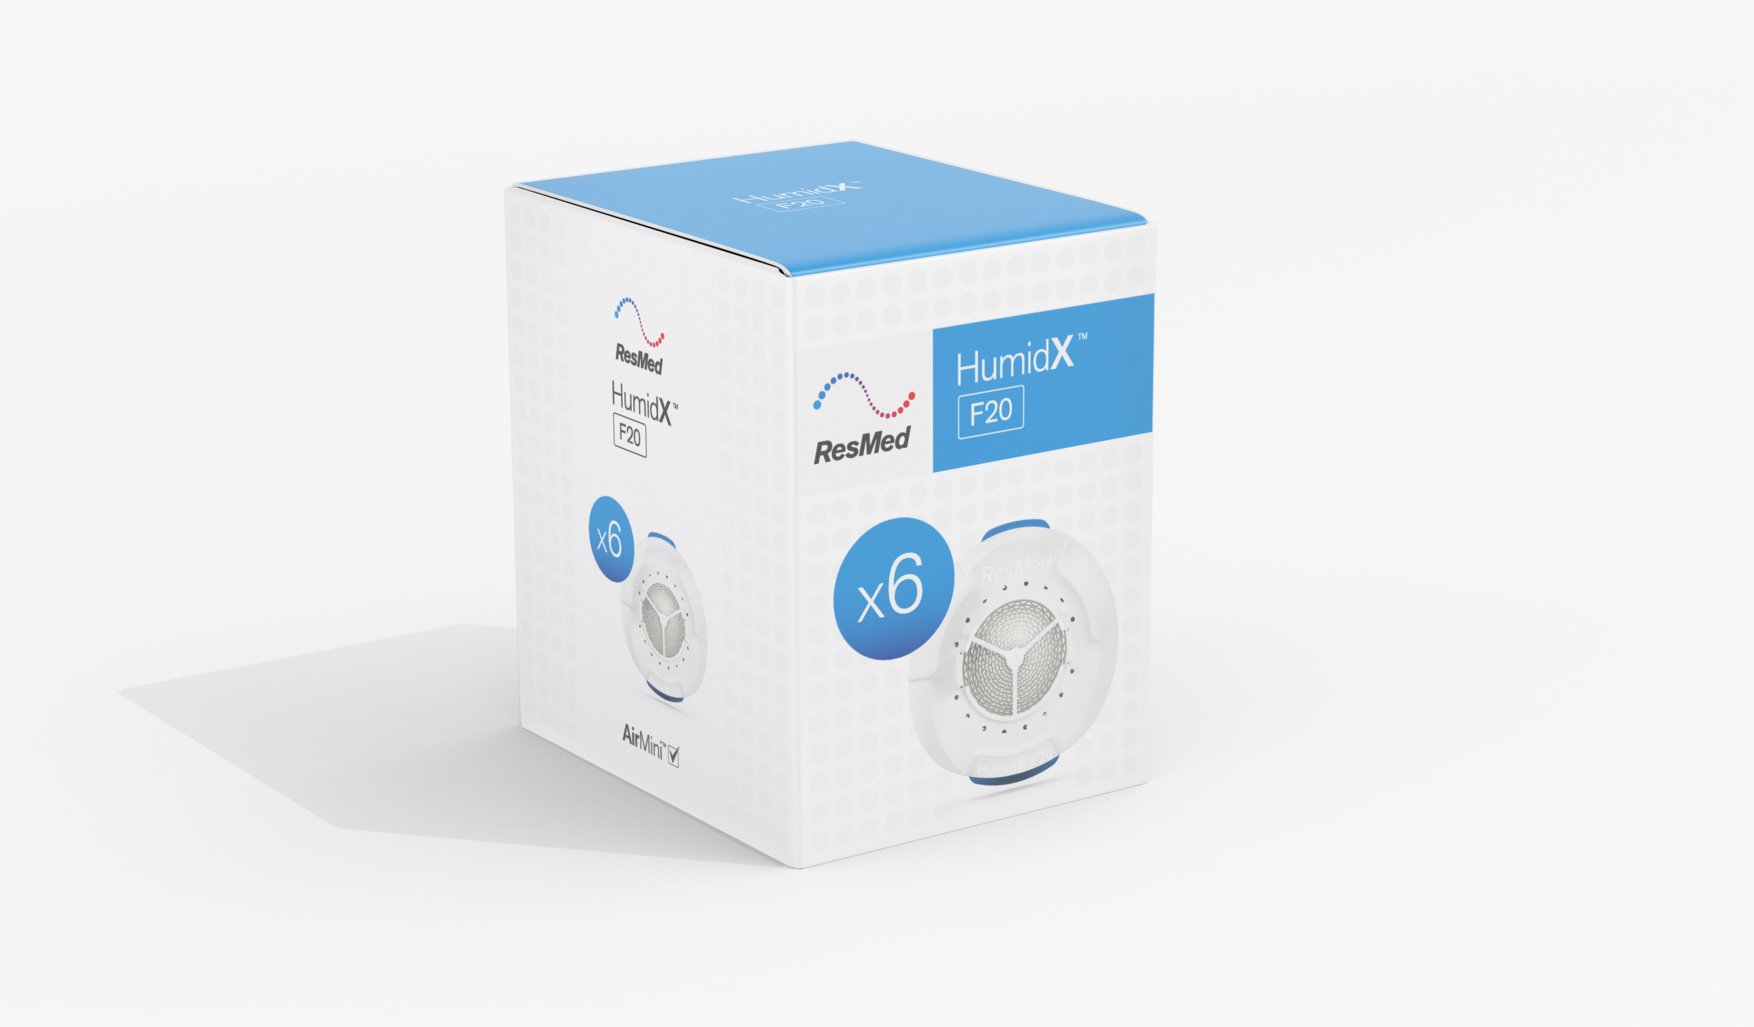 Airmini F20 Humidx 6 Pack Cpap Depot 3347